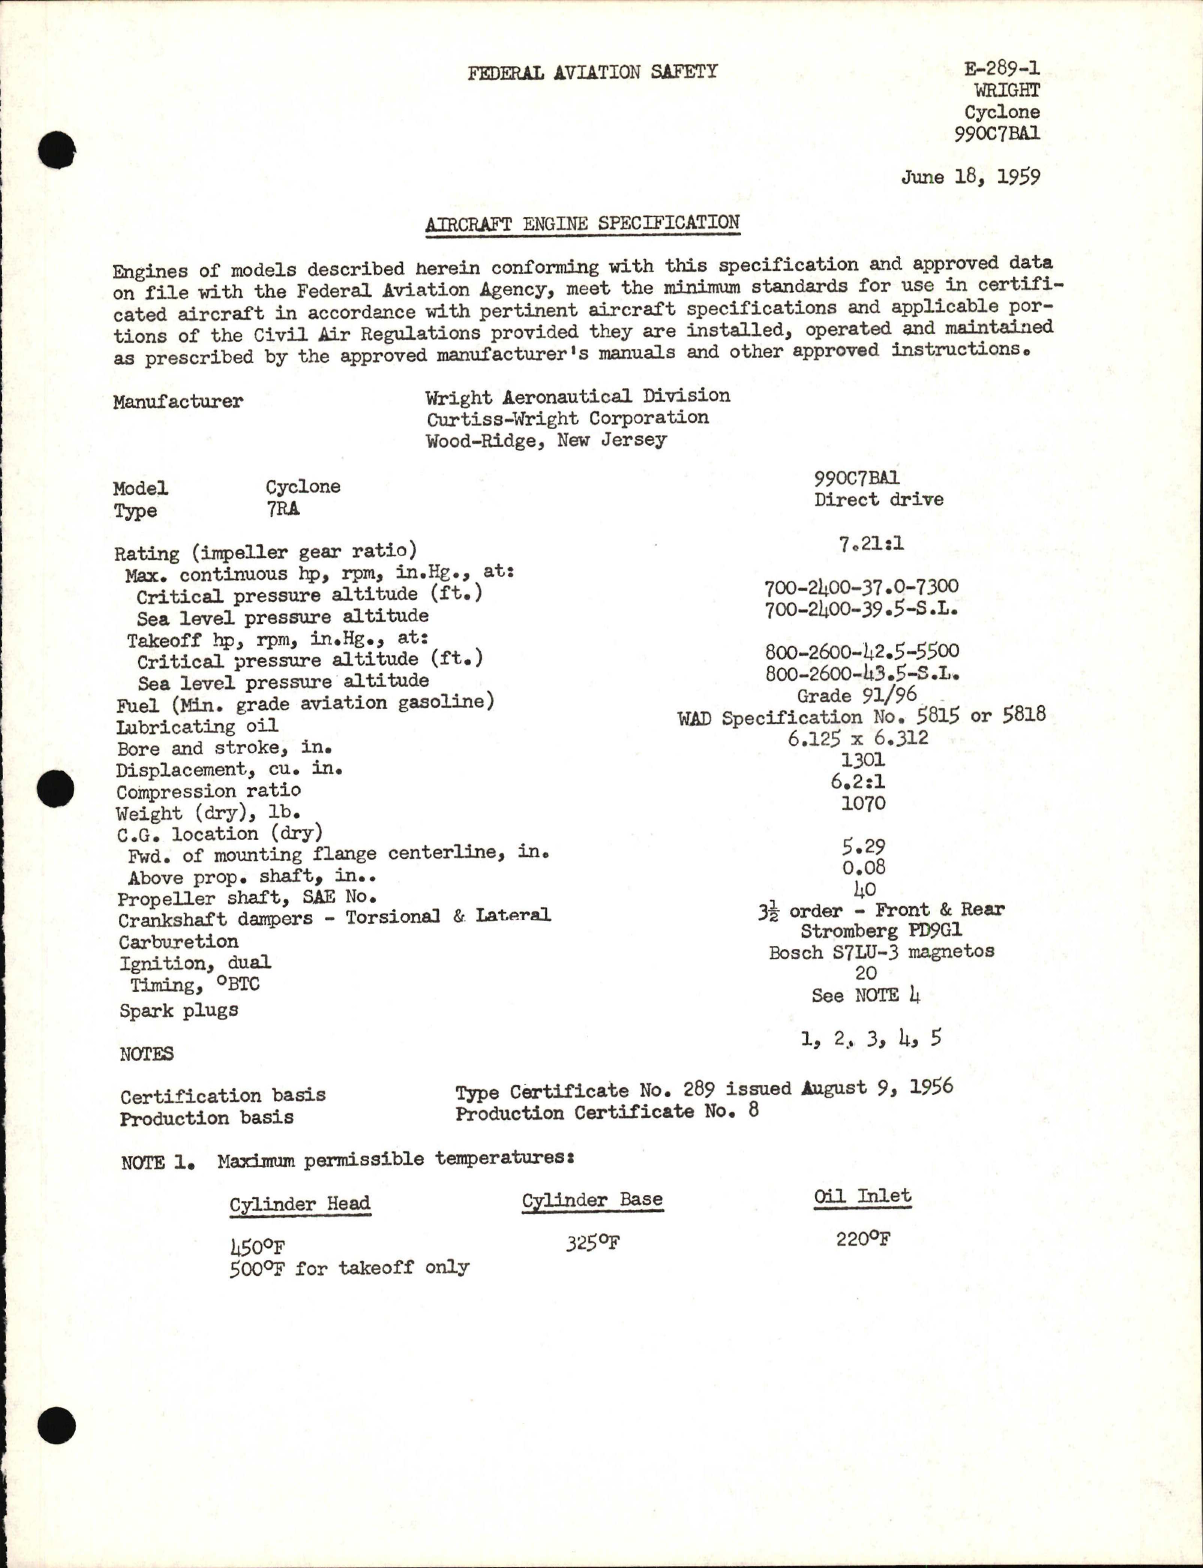 Sample page 1 from AirCorps Library document: 990C7BA1 Cyclone